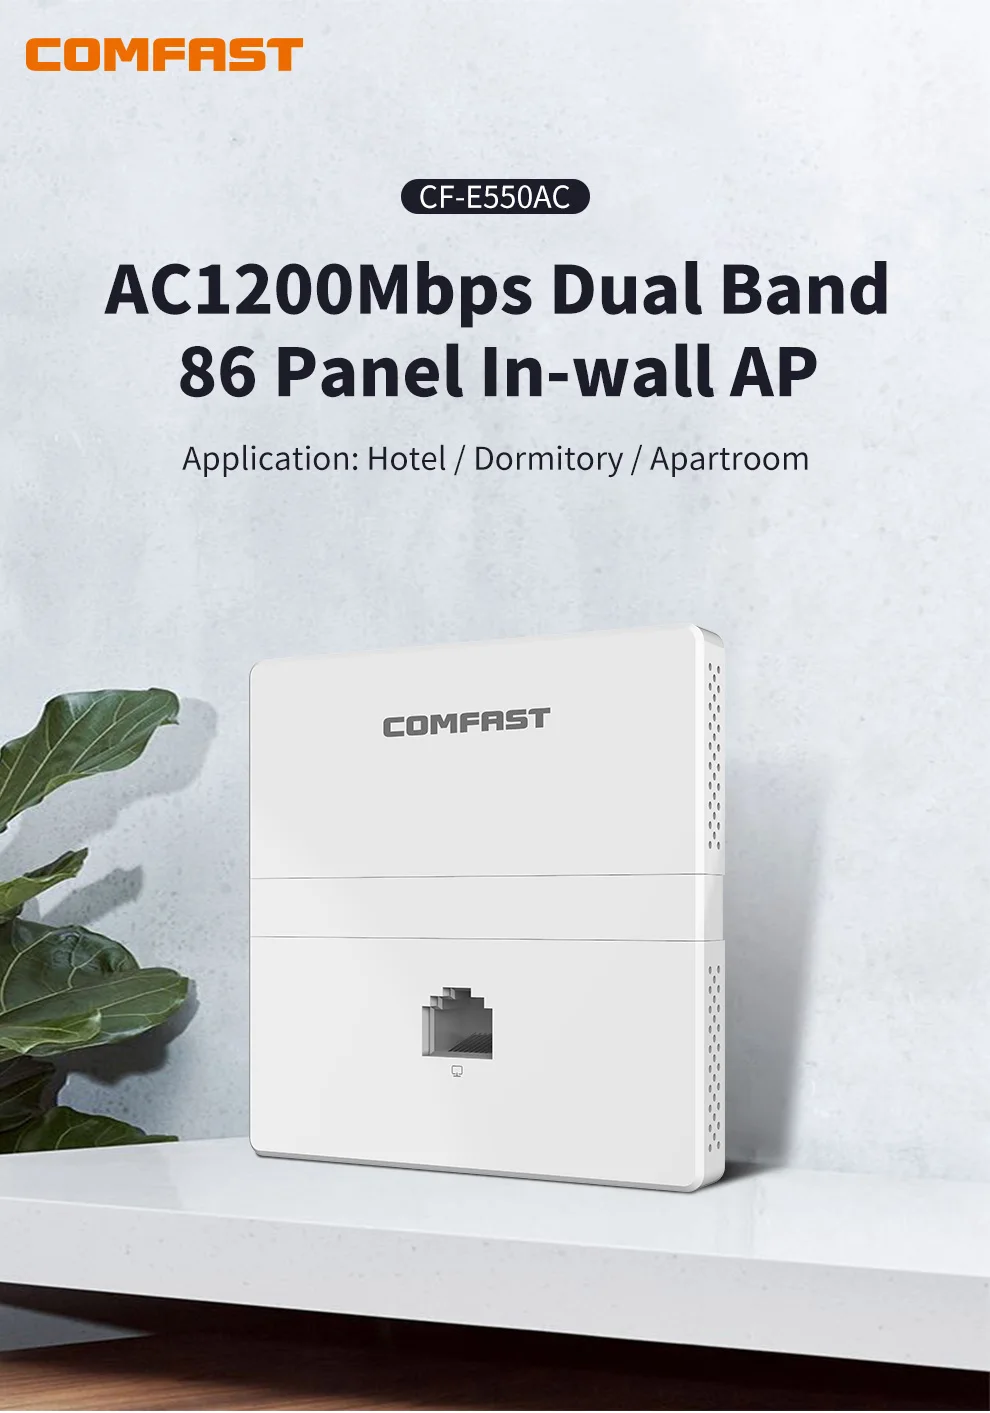 

Comfast CF-E550AC Wireless In-wall AP 1200Mbps 2.4G & 5G Dual Band Ethernet Access Point RJ45 WAN LAN Port Router for Hotel